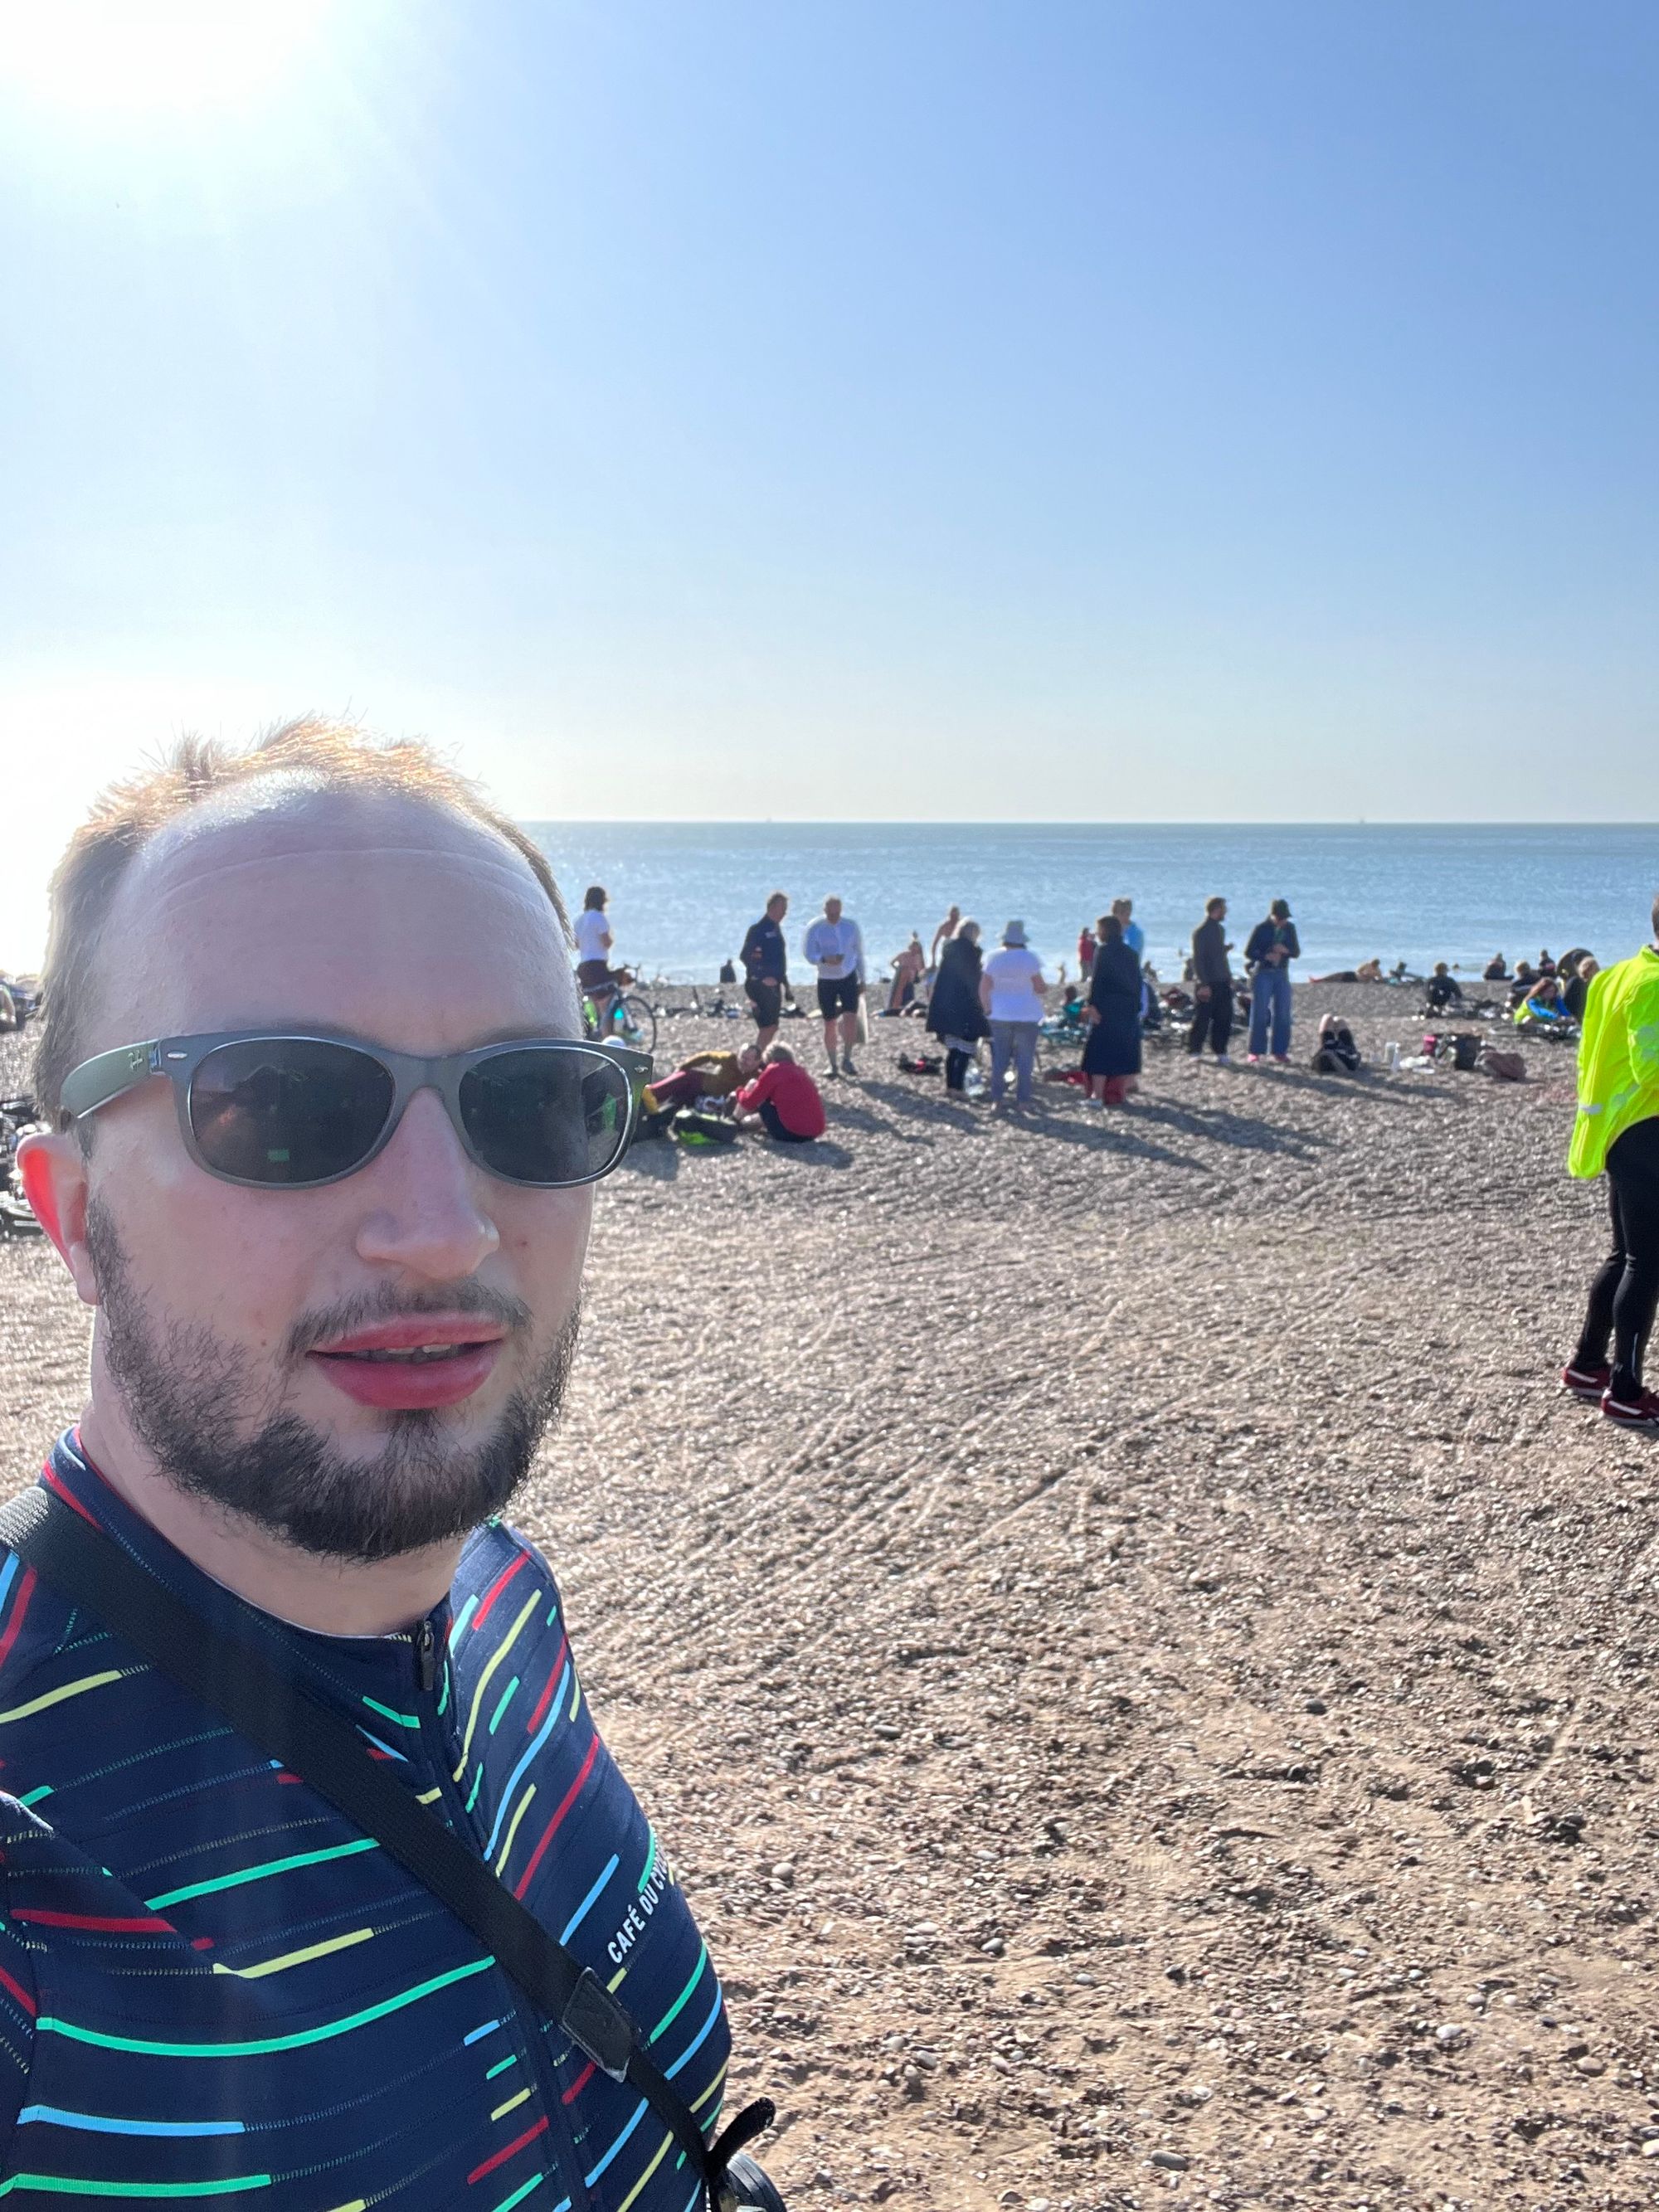 Selfie of Jonathan in sunglasses wearing a stripy cycling jersey waiting in a queue on the beach.